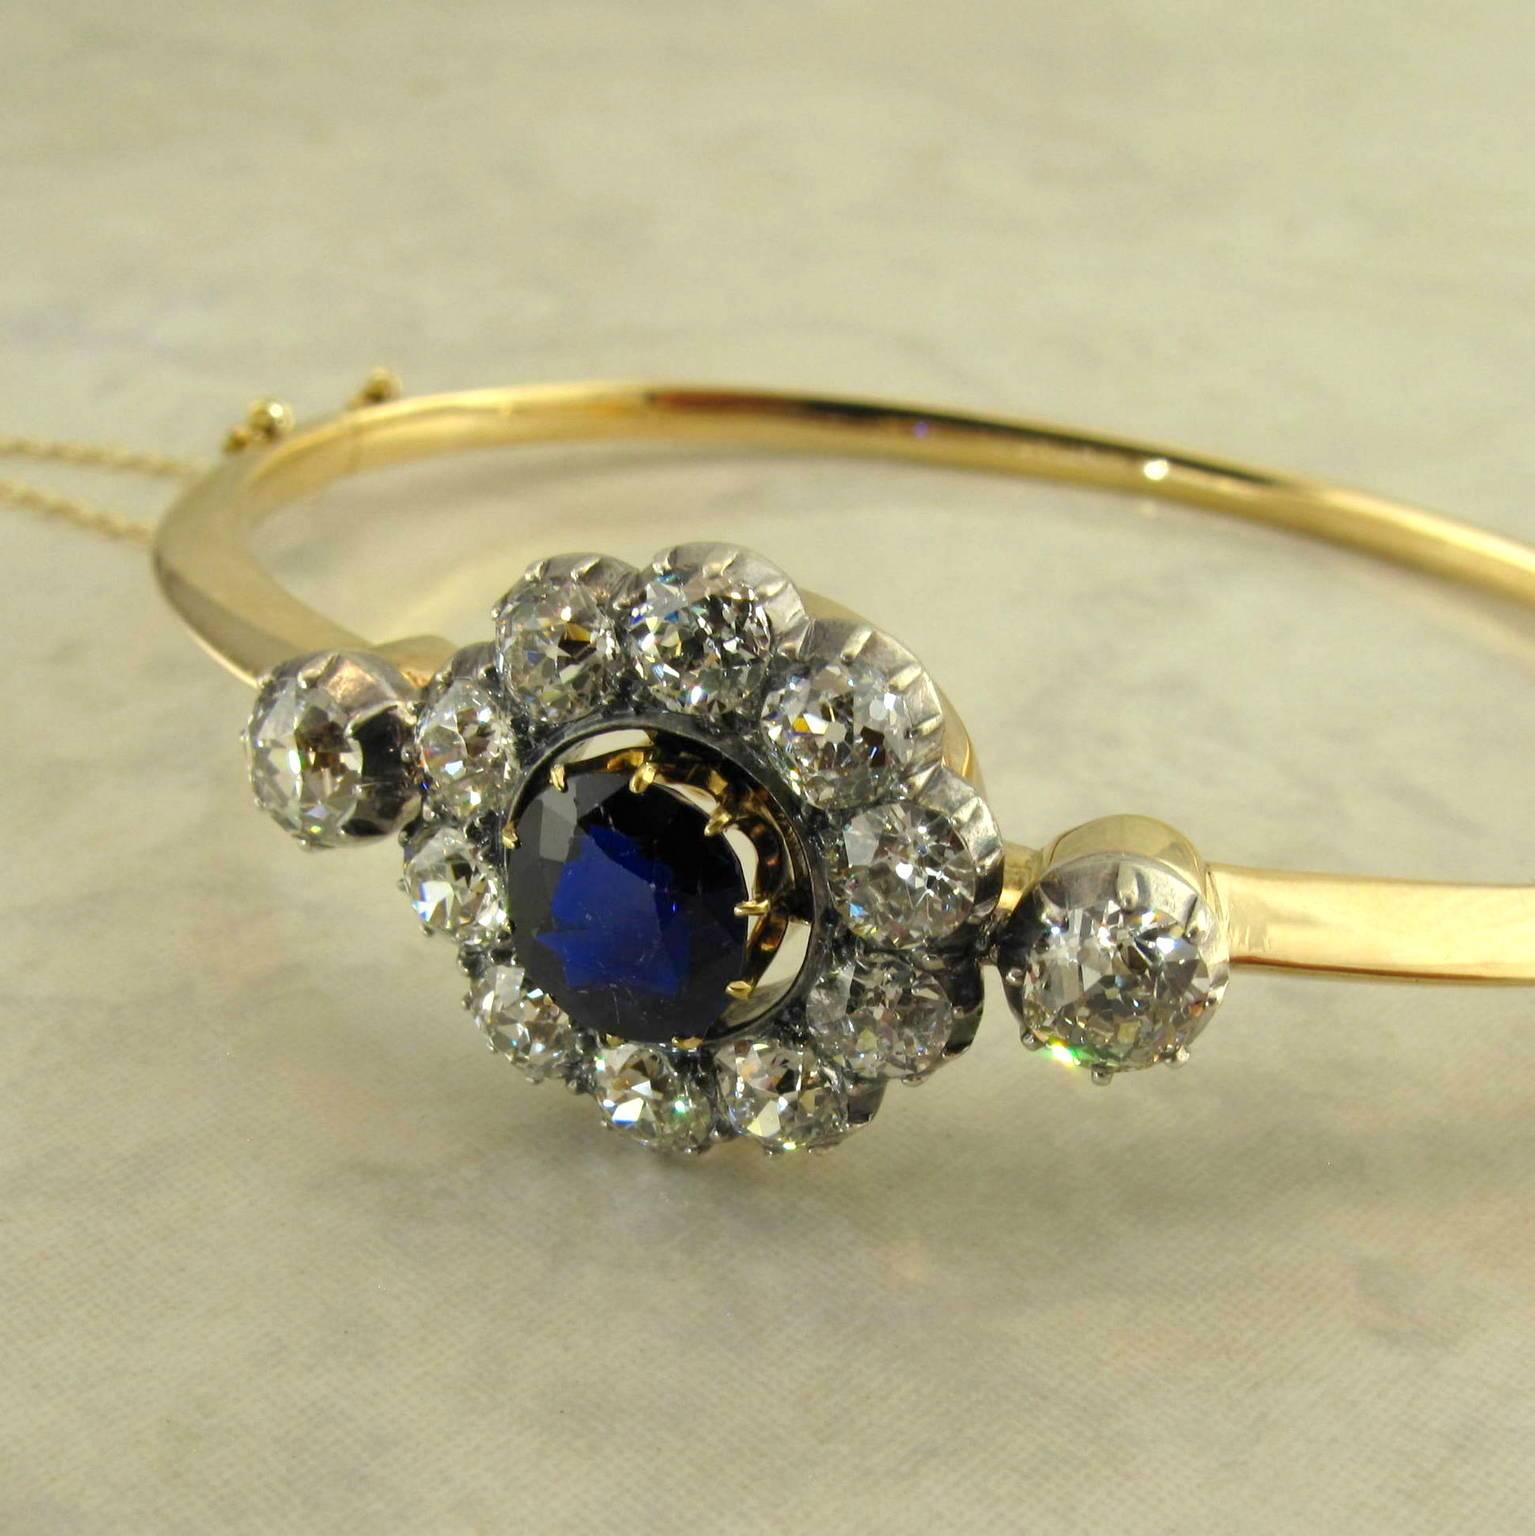 14k yellow gold and silver antique Victorian sapphire and diamond bangle bracelet.
The knife edge bangle fitted with a one piece removable top featuring a center round AGL certified natural untreated sapphire measuring 7.29 x 6.40 x 3.86 mm,
with an